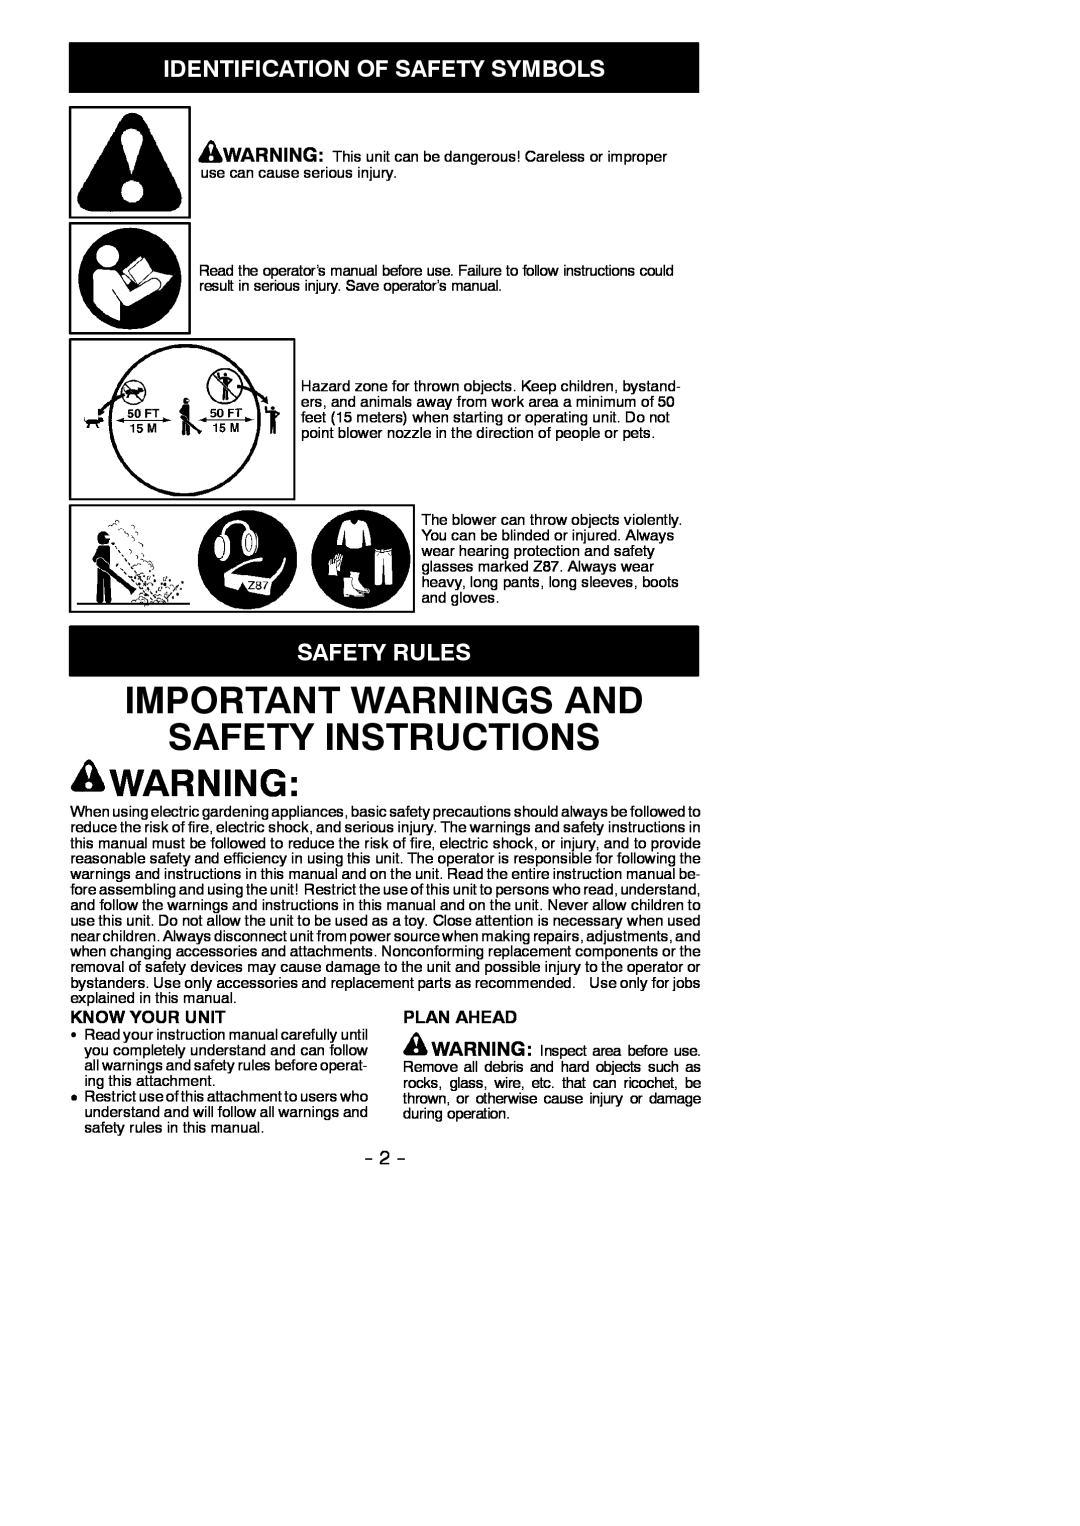 Poulan 952711827 Important Warnings And Safety Instructions Warning, Identification Of Safety Symbols, Safety Rules 